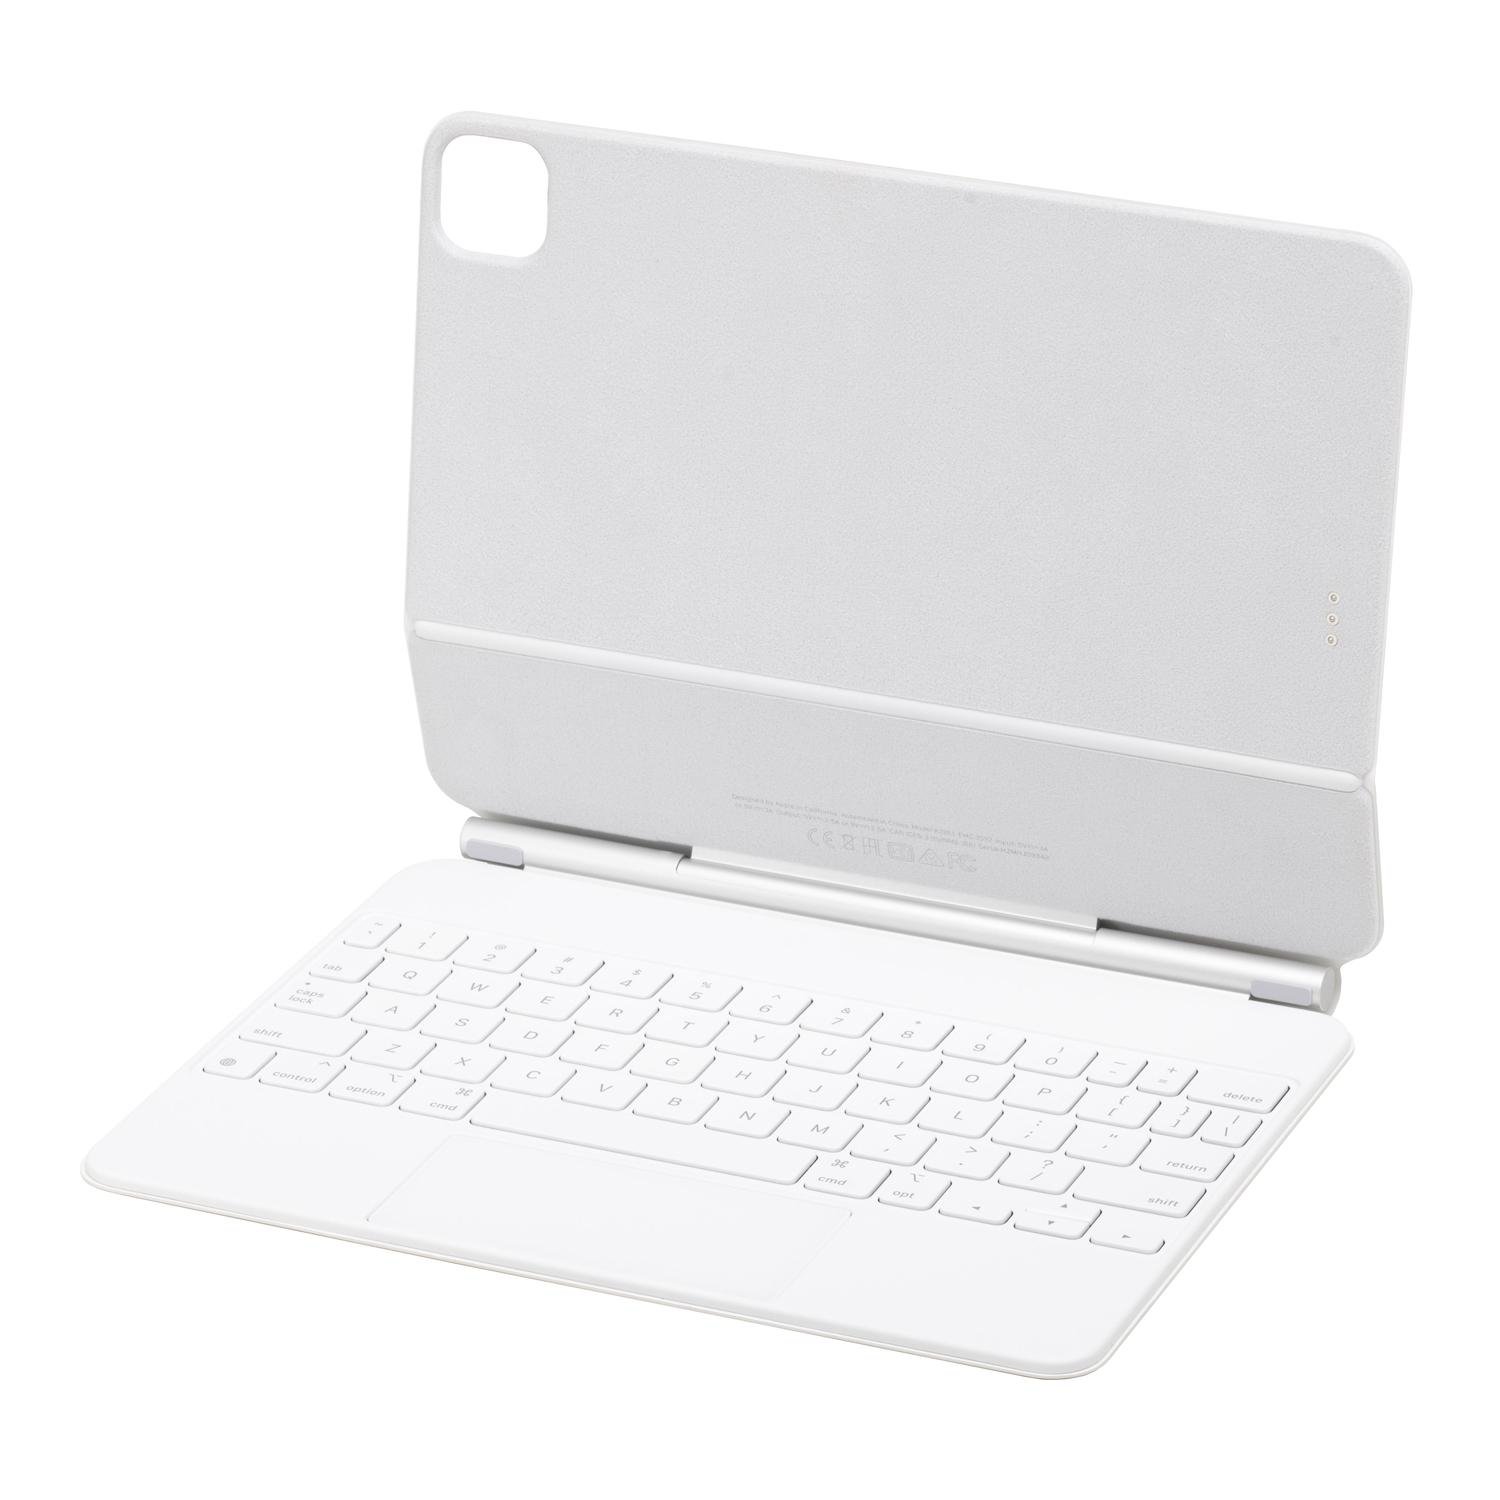 PC/タブレット PC周辺機器 Apple MJQJ3LL/A Magic Keyboard with Trackpad for at MacSales.com